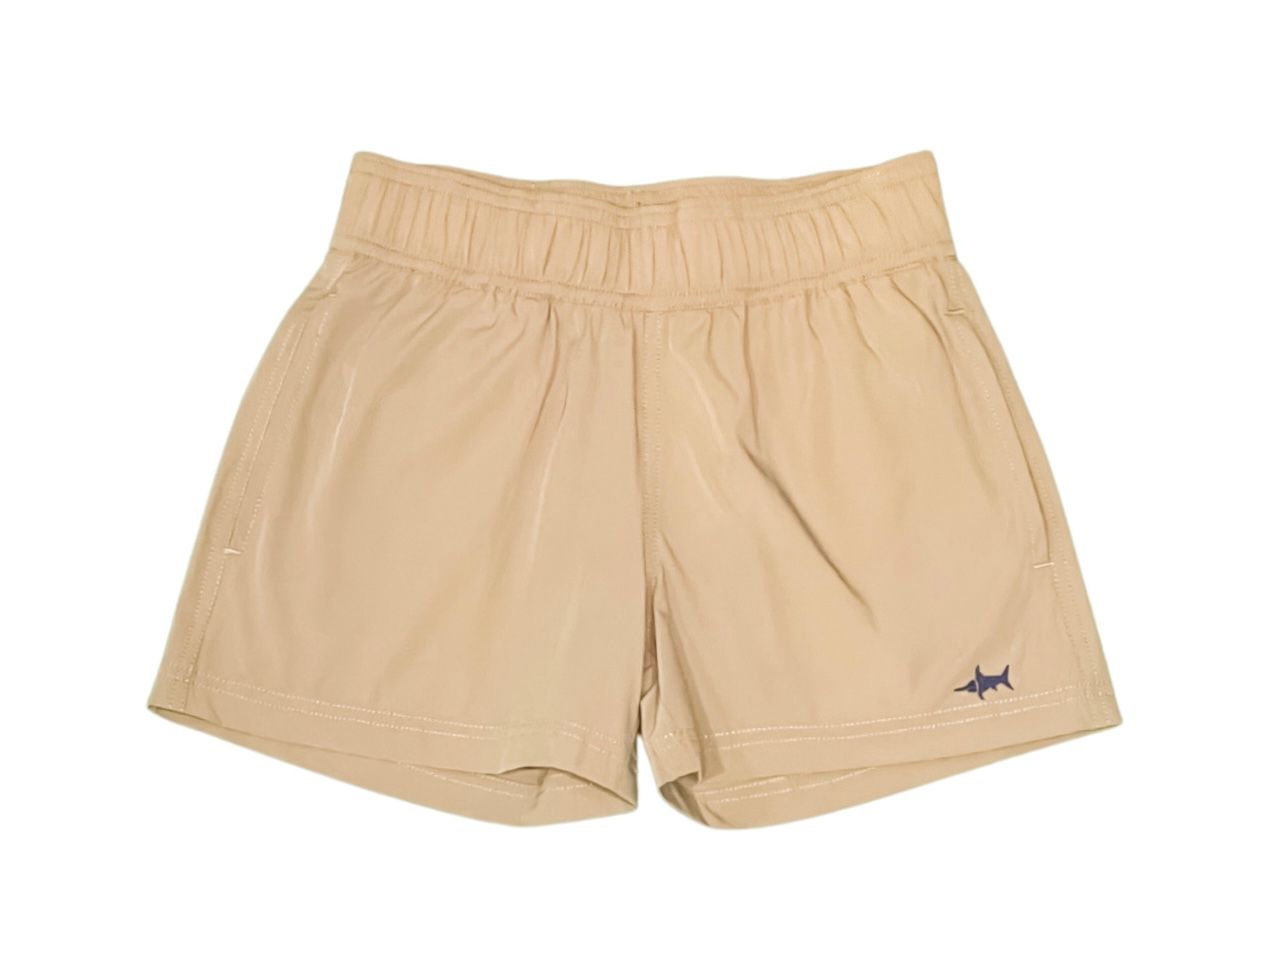 Inlet Performance Shorts - 6043-47